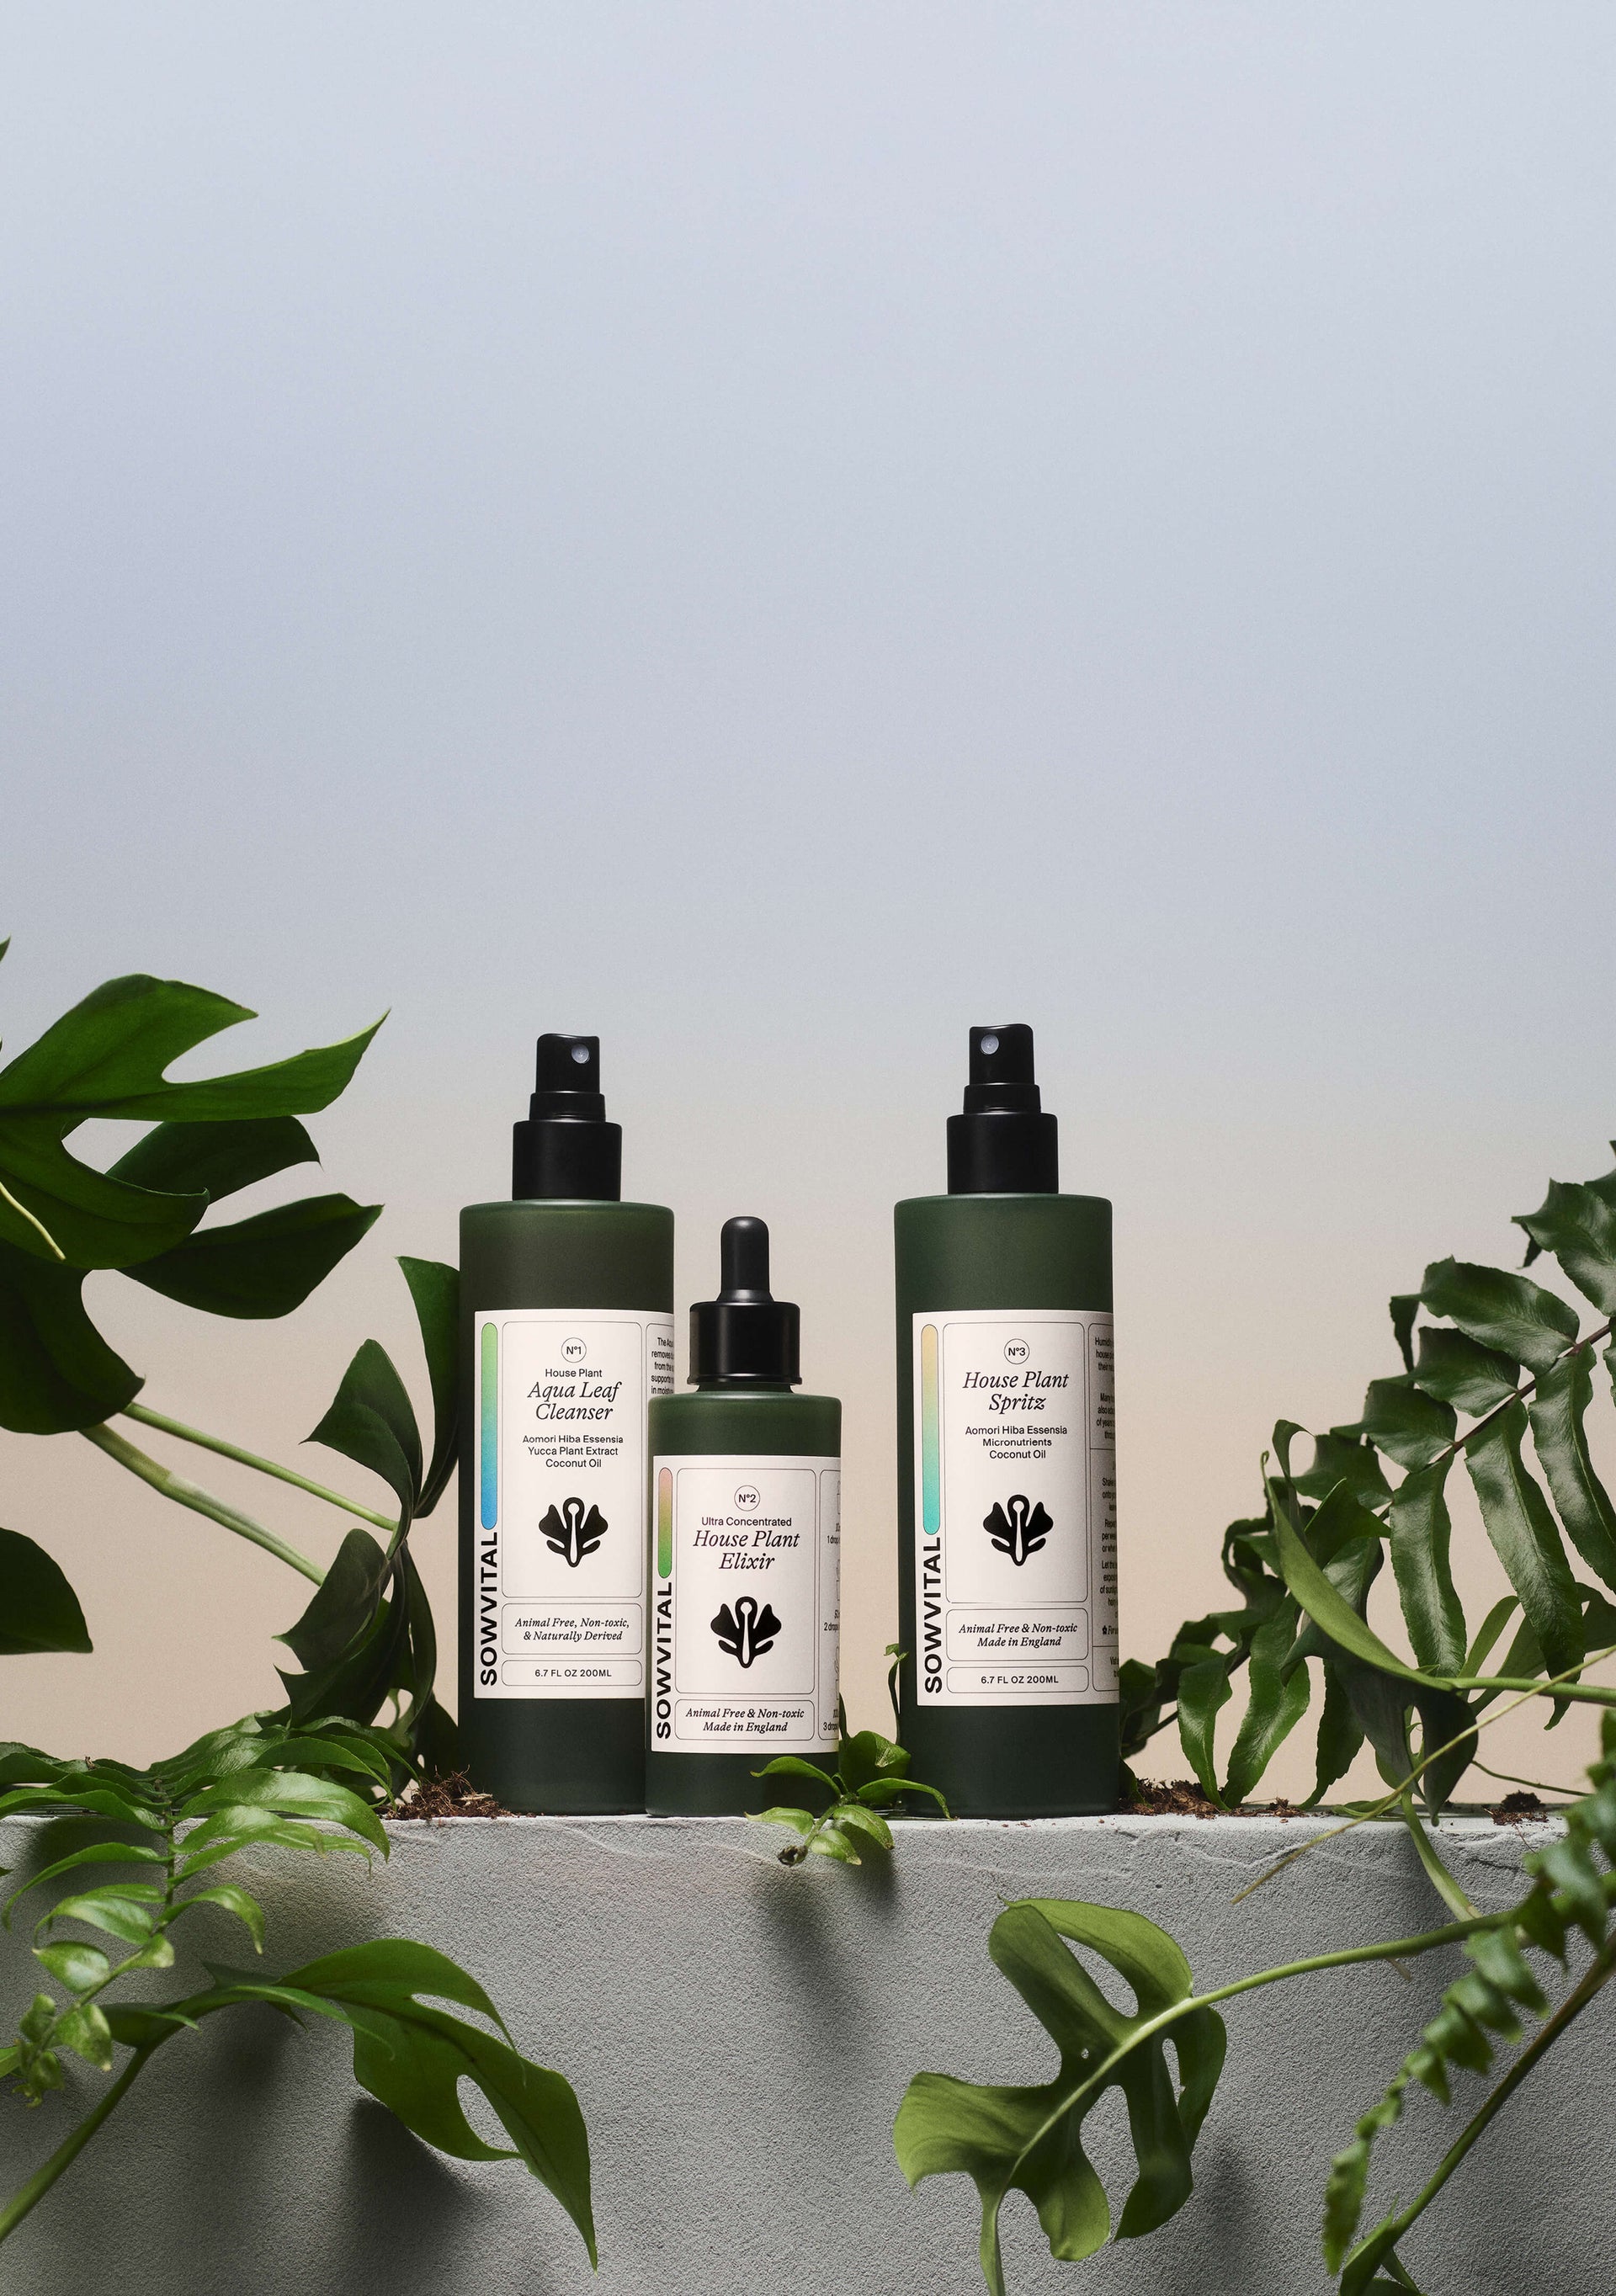 Sowvital three step kit, Aqua leaf cleanser, House plant elixir and House plant spritz, surrounded by different kinds of plants.